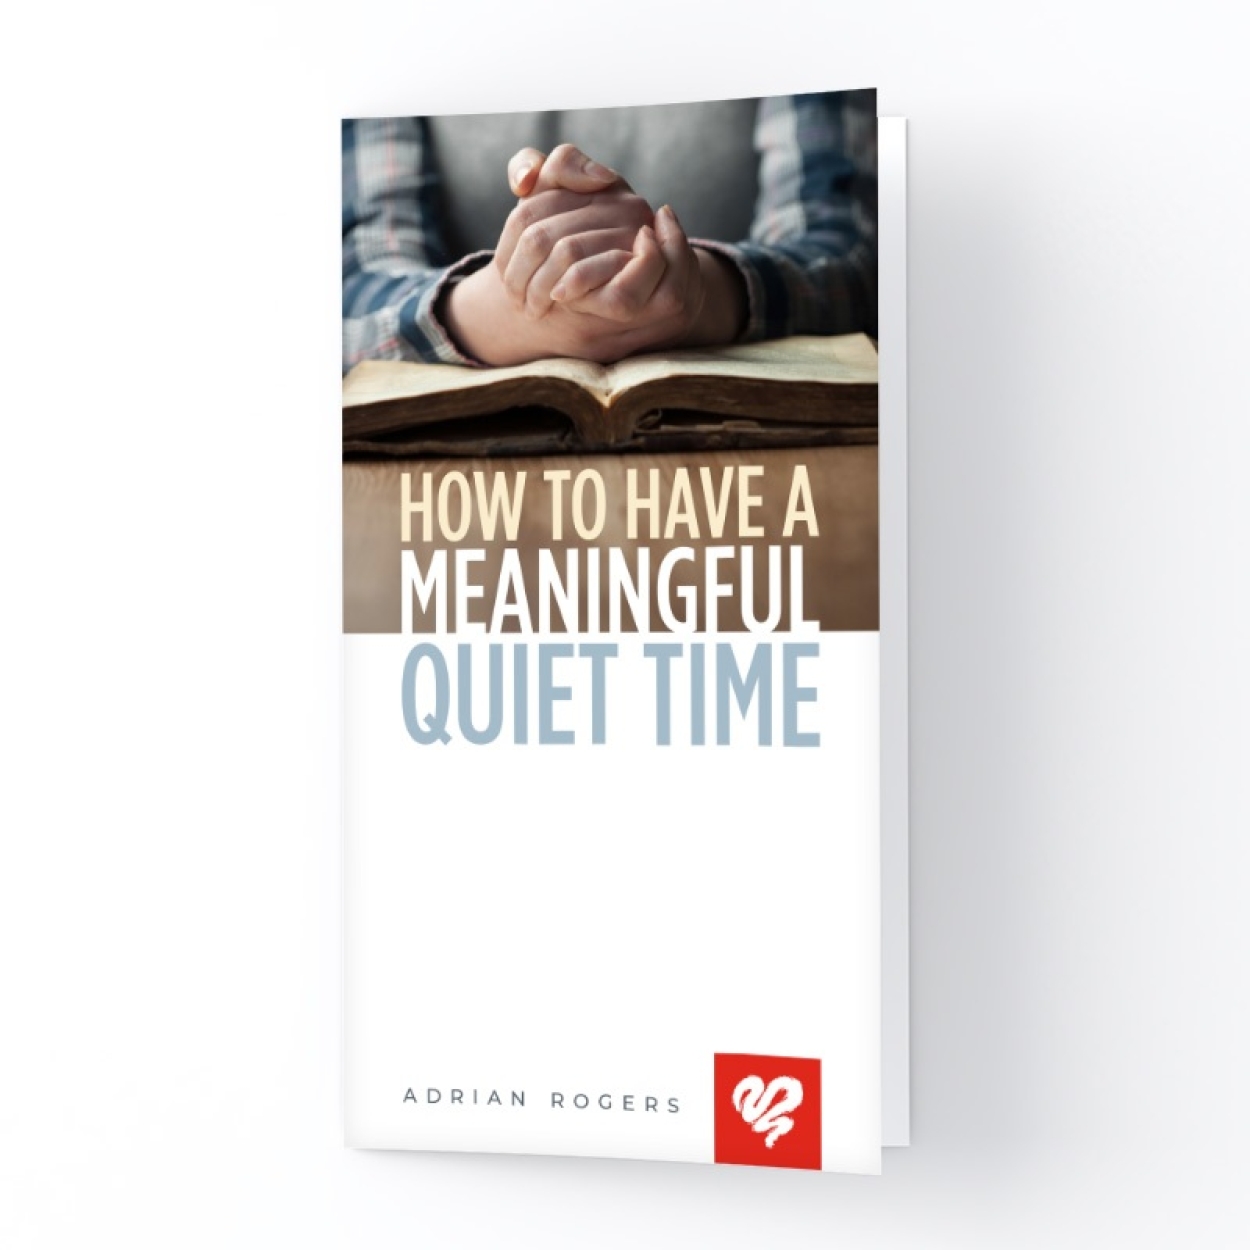 K148 How to Have a Meaningful Quiet Time 3 D Square